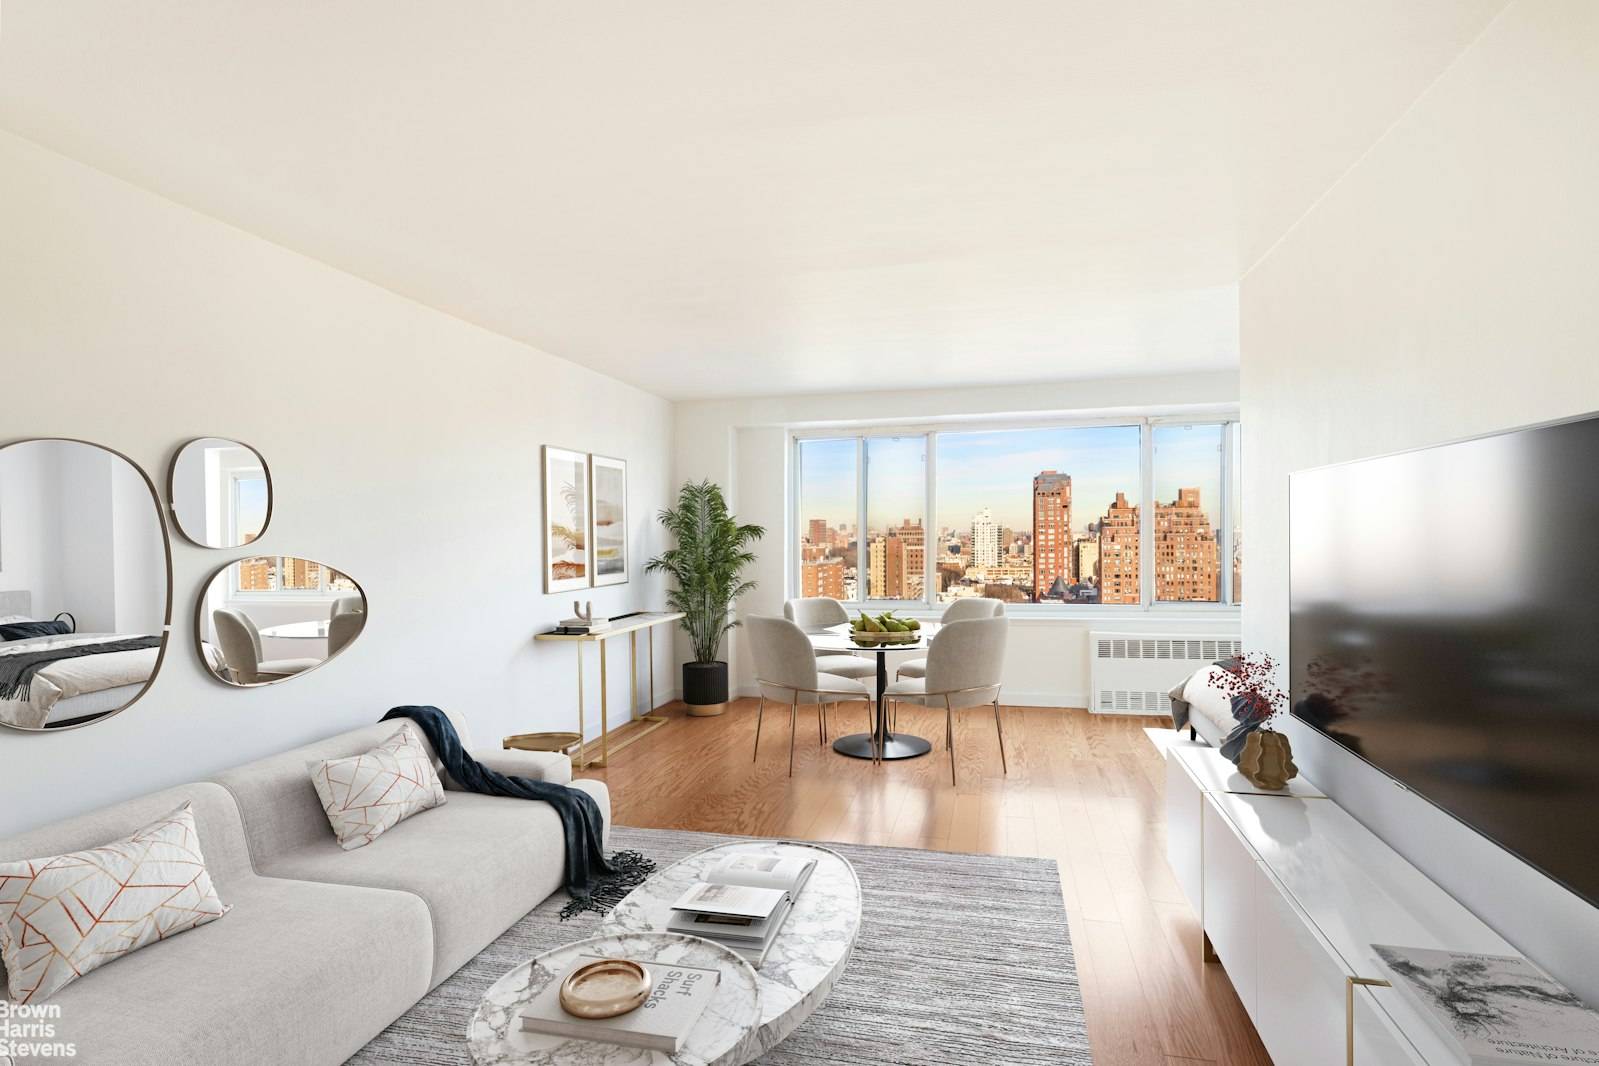 This Spacious and Bright top floor alcove studio at 400 Central Park West brings together the charm of the Upper West Side and serenity of living by Central Park.